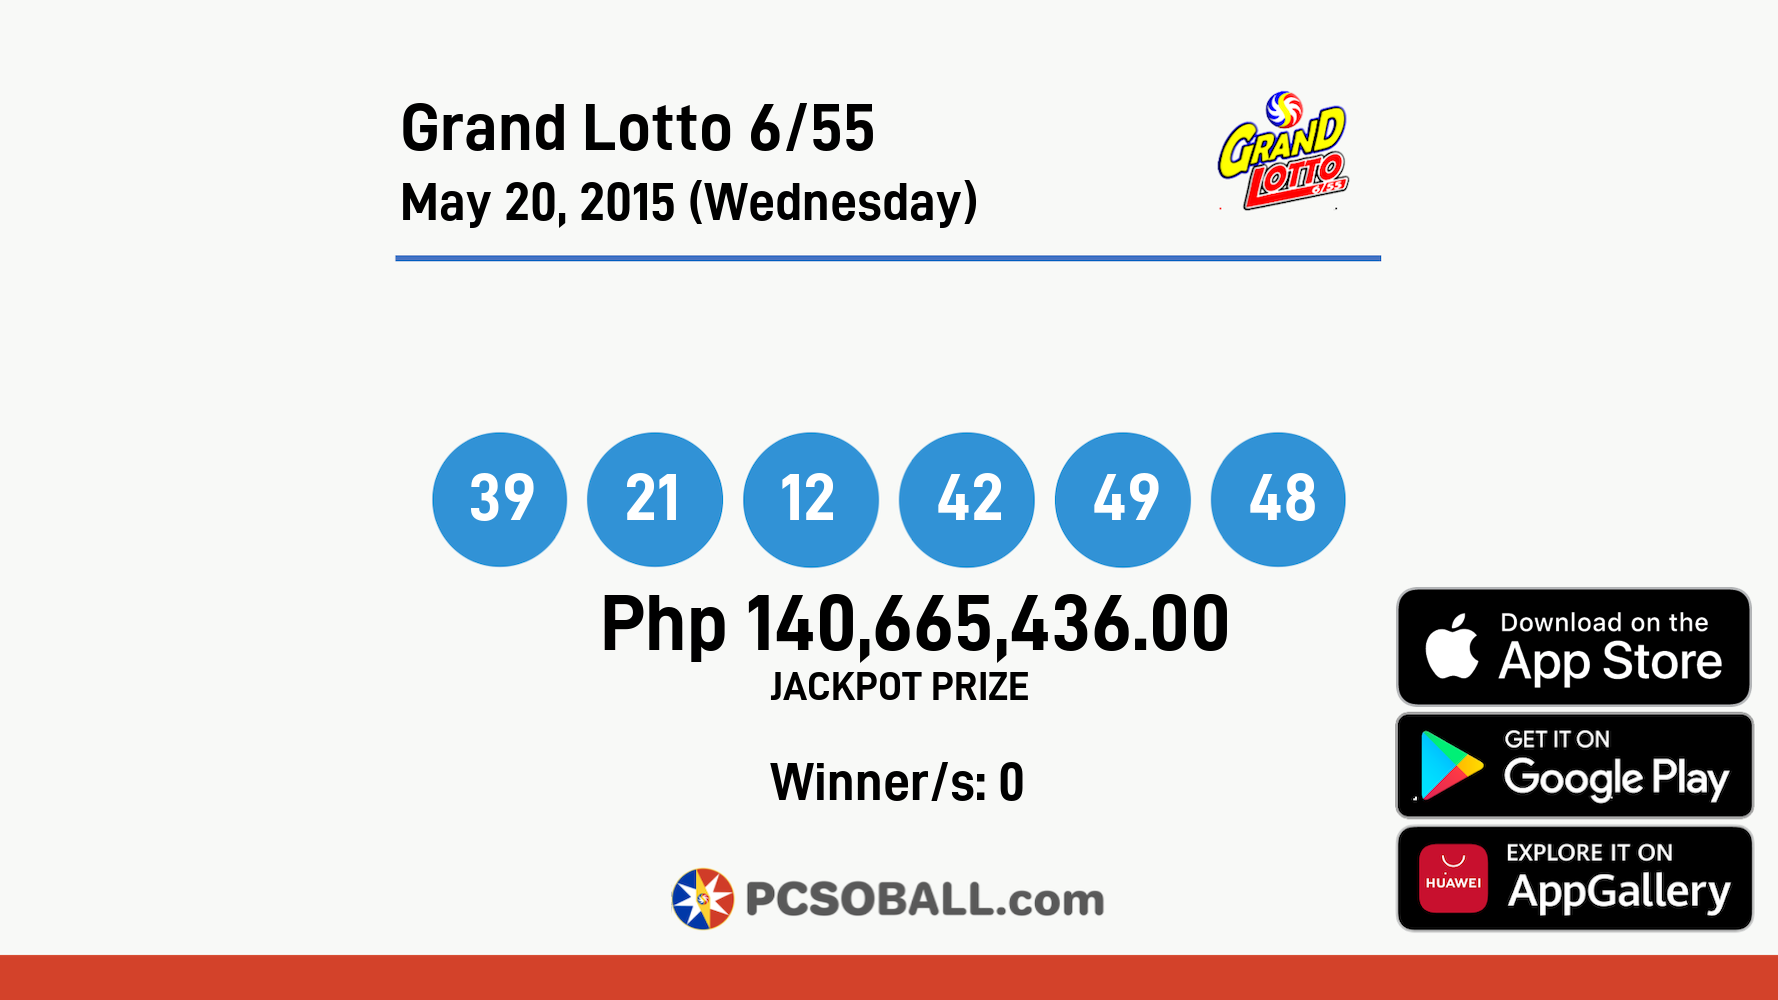 Grand Lotto 6/55 May 20, 2015 (Wednesday) Result